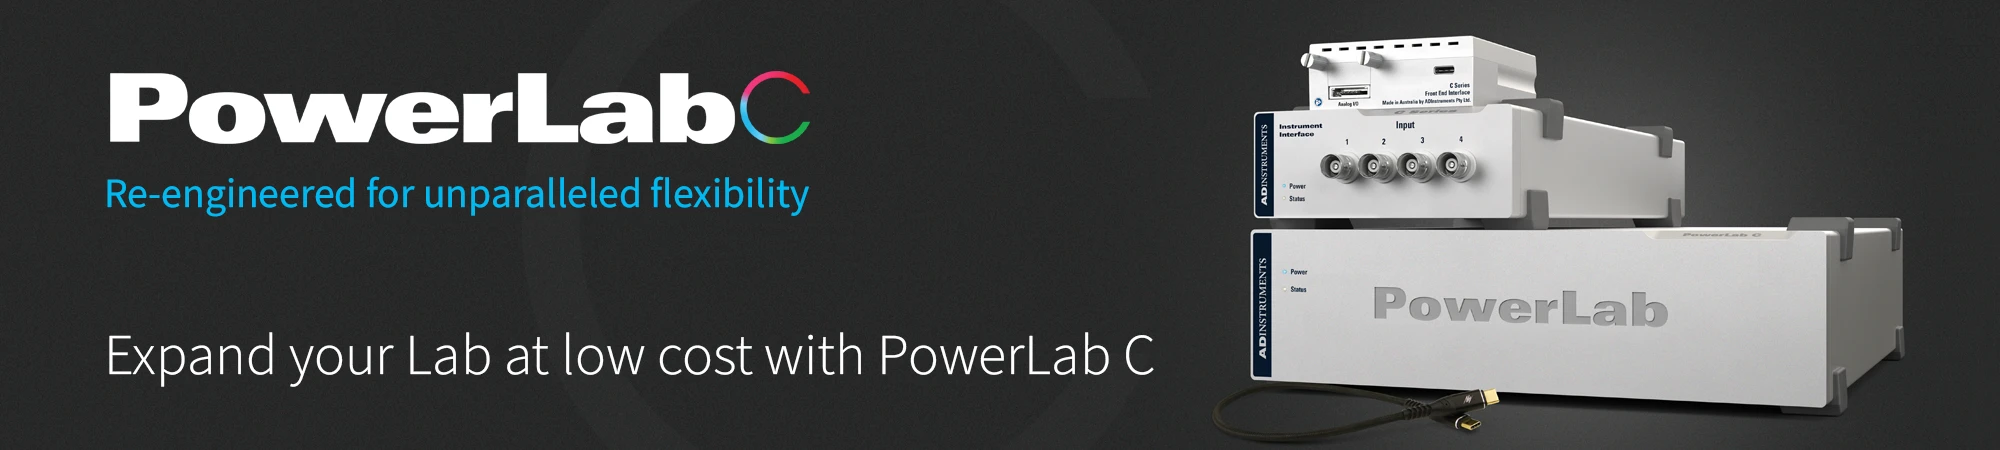 Expand your Lab at low cost with PowerLab C